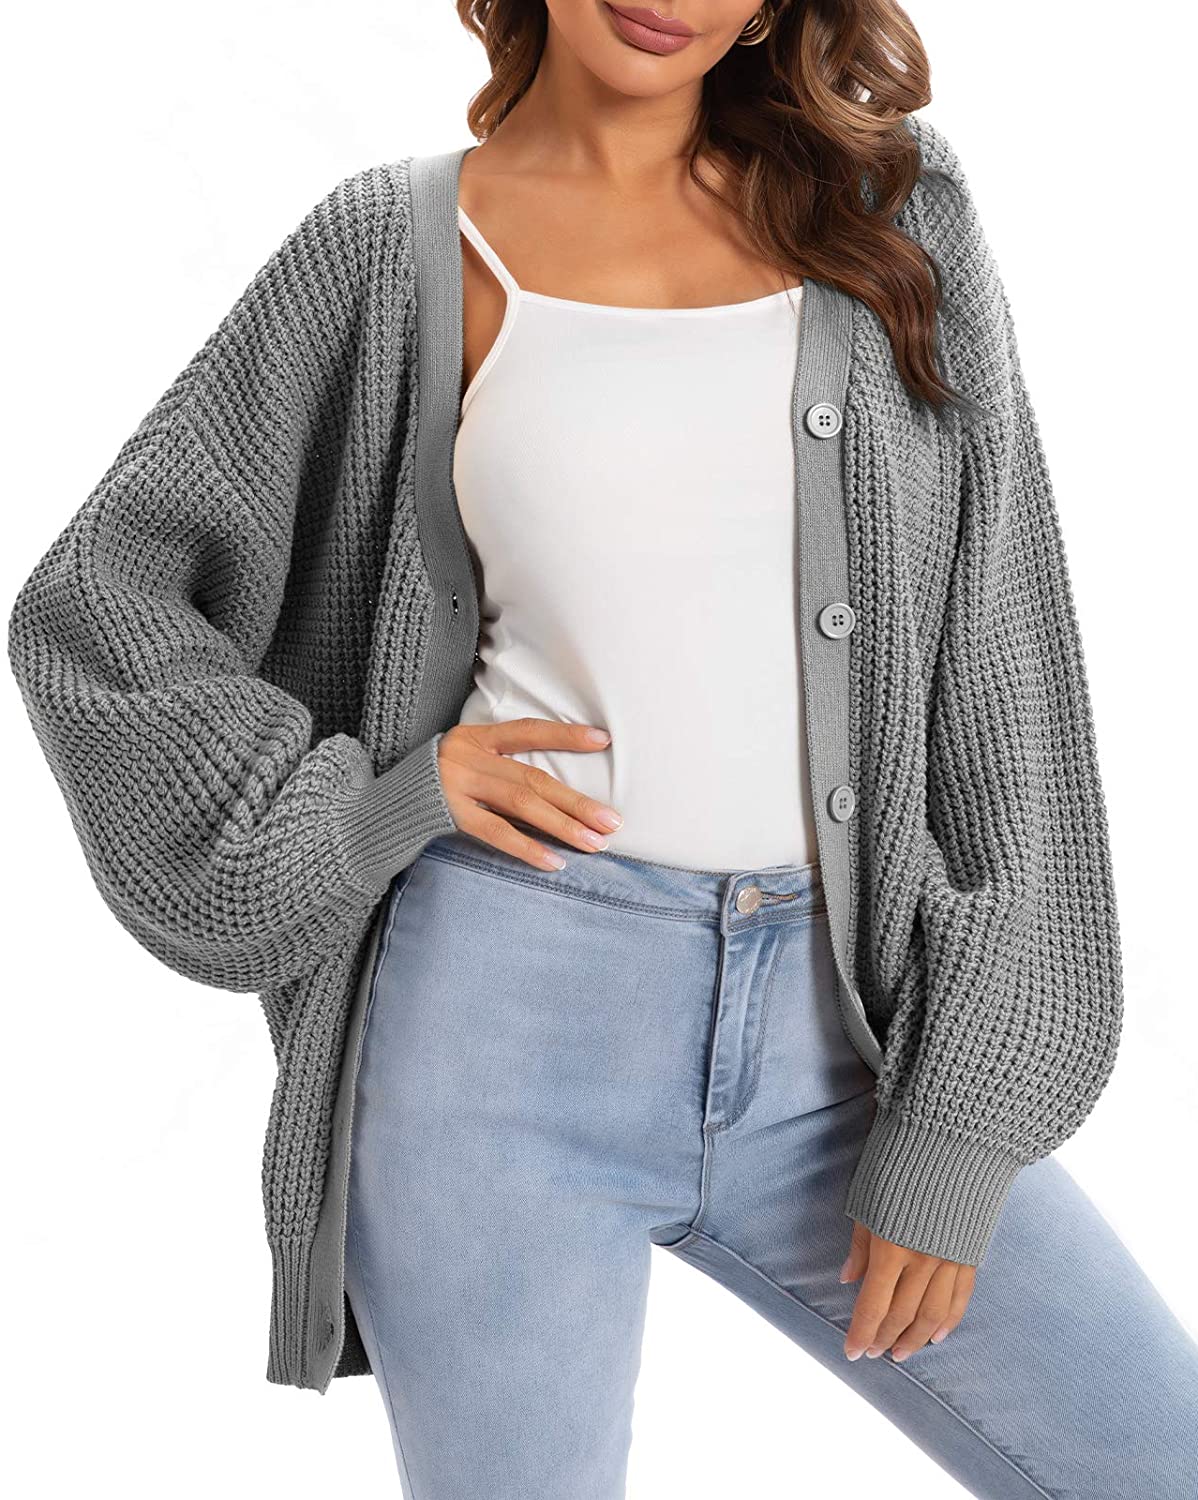 QUALFORT Women's Open Front Oversized Long Sleeve Chunky Cable Knit Cardigan Sweater with Pockets